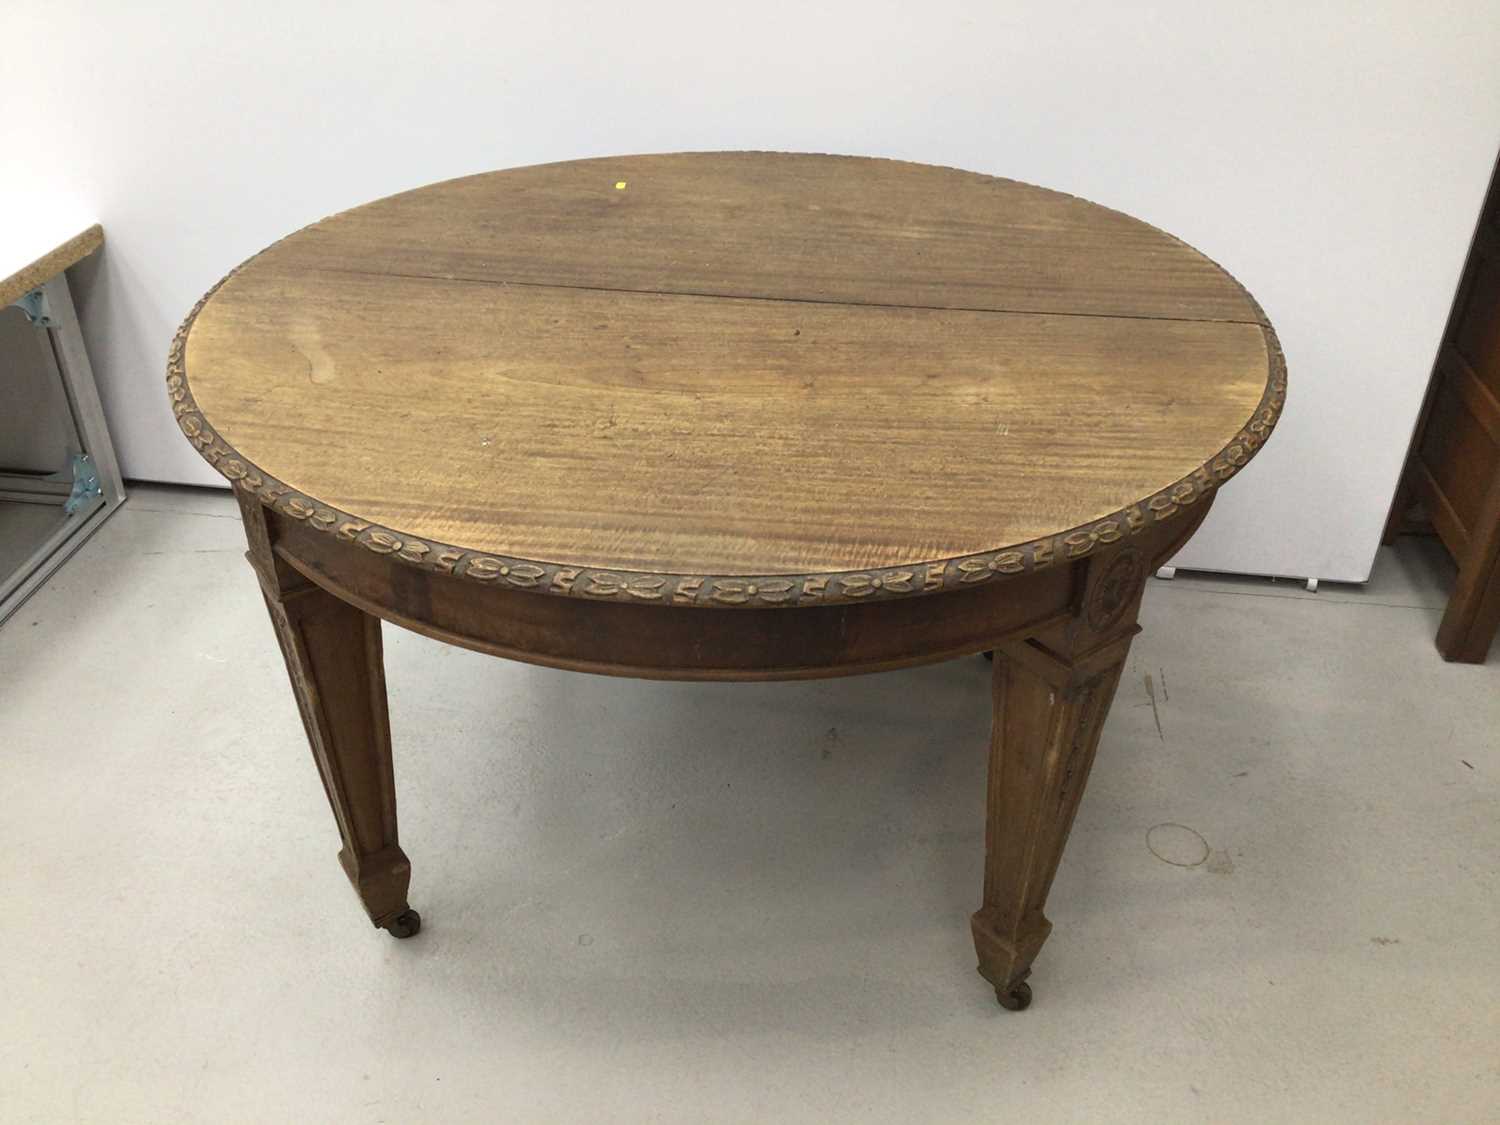 Lot 55 - Early. 20th century mahogany  dining table with extra leaf